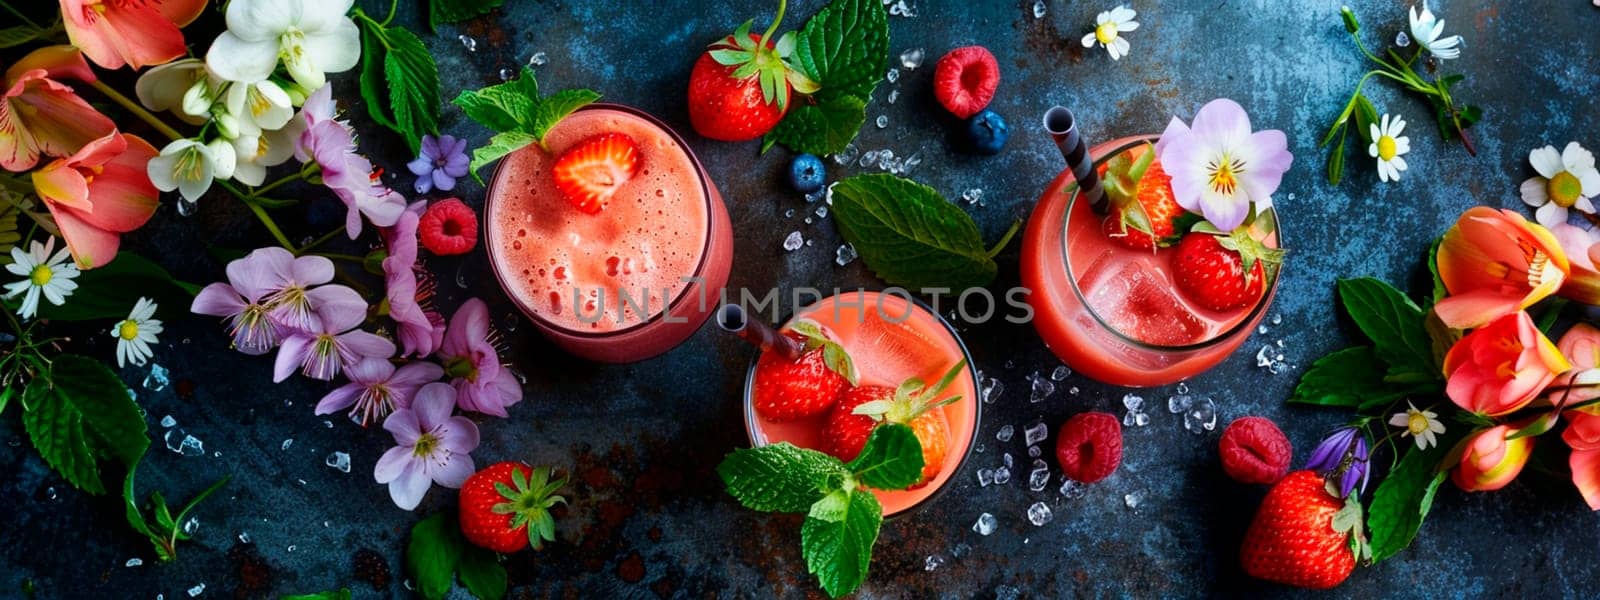 different fruit smoothies in a glass. selective focus. by yanadjana